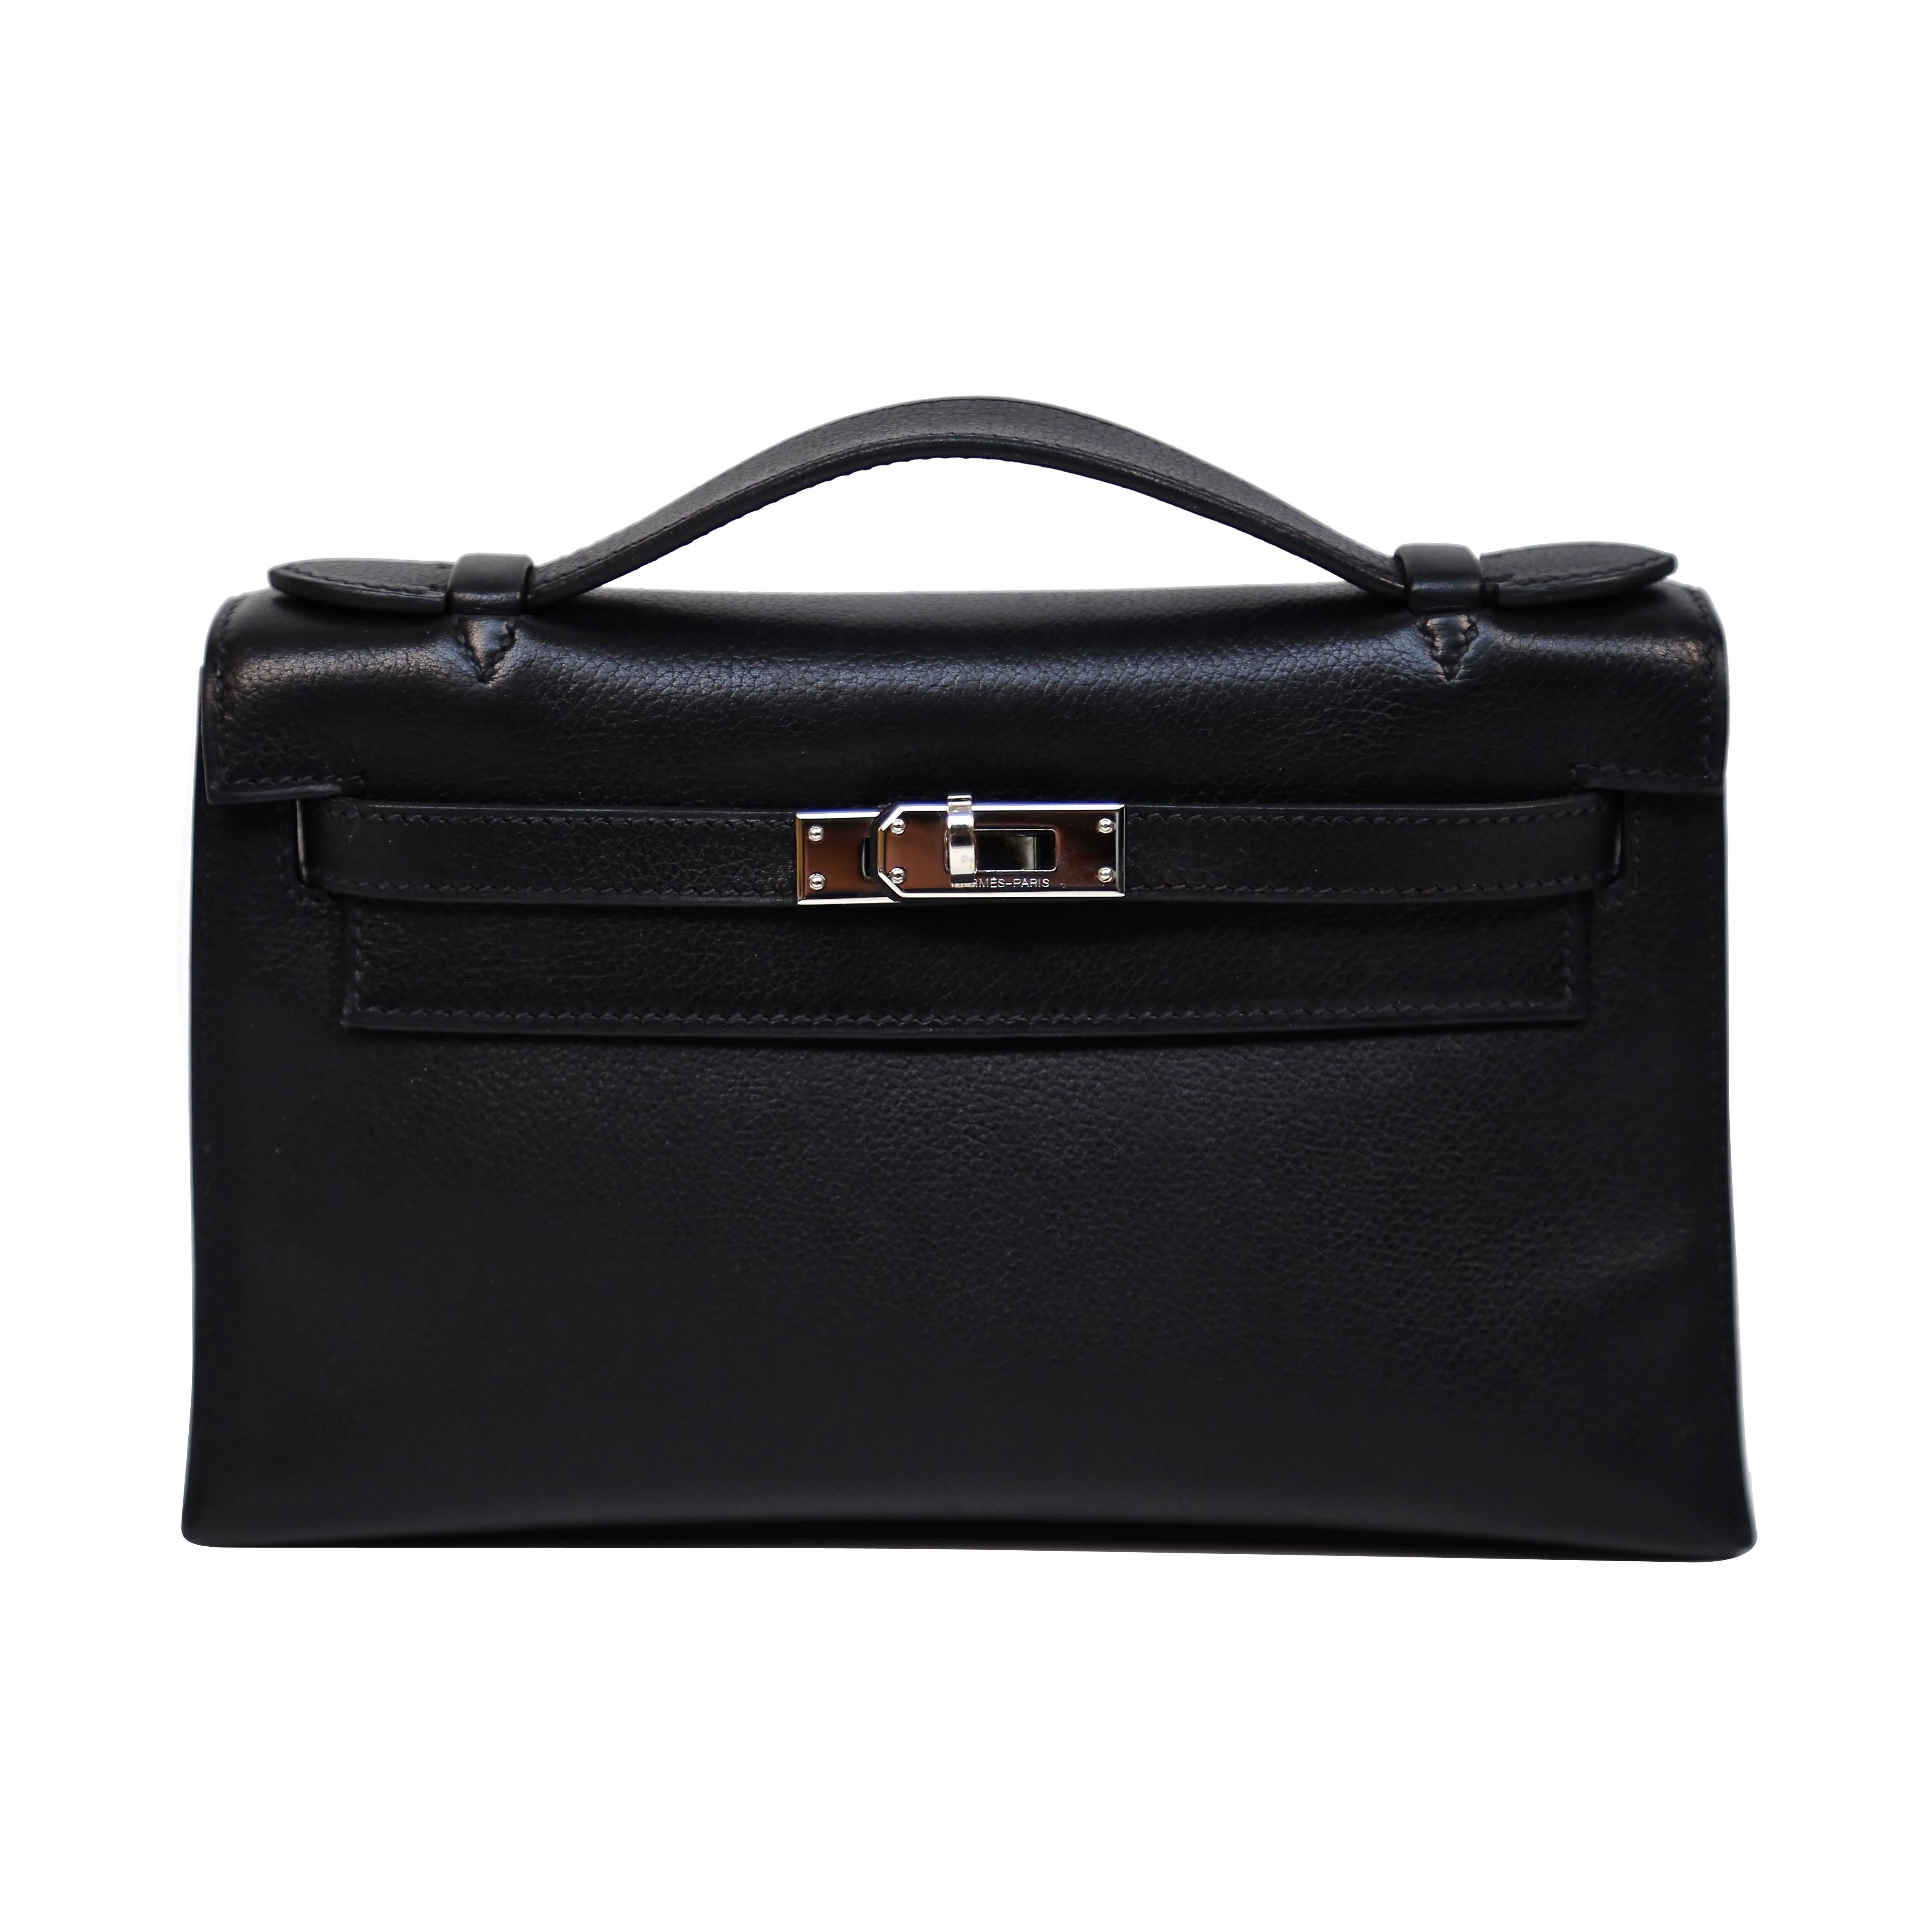 Hermes Kelly Pochette Clutch in black evergrain leather with ruthenium hardware